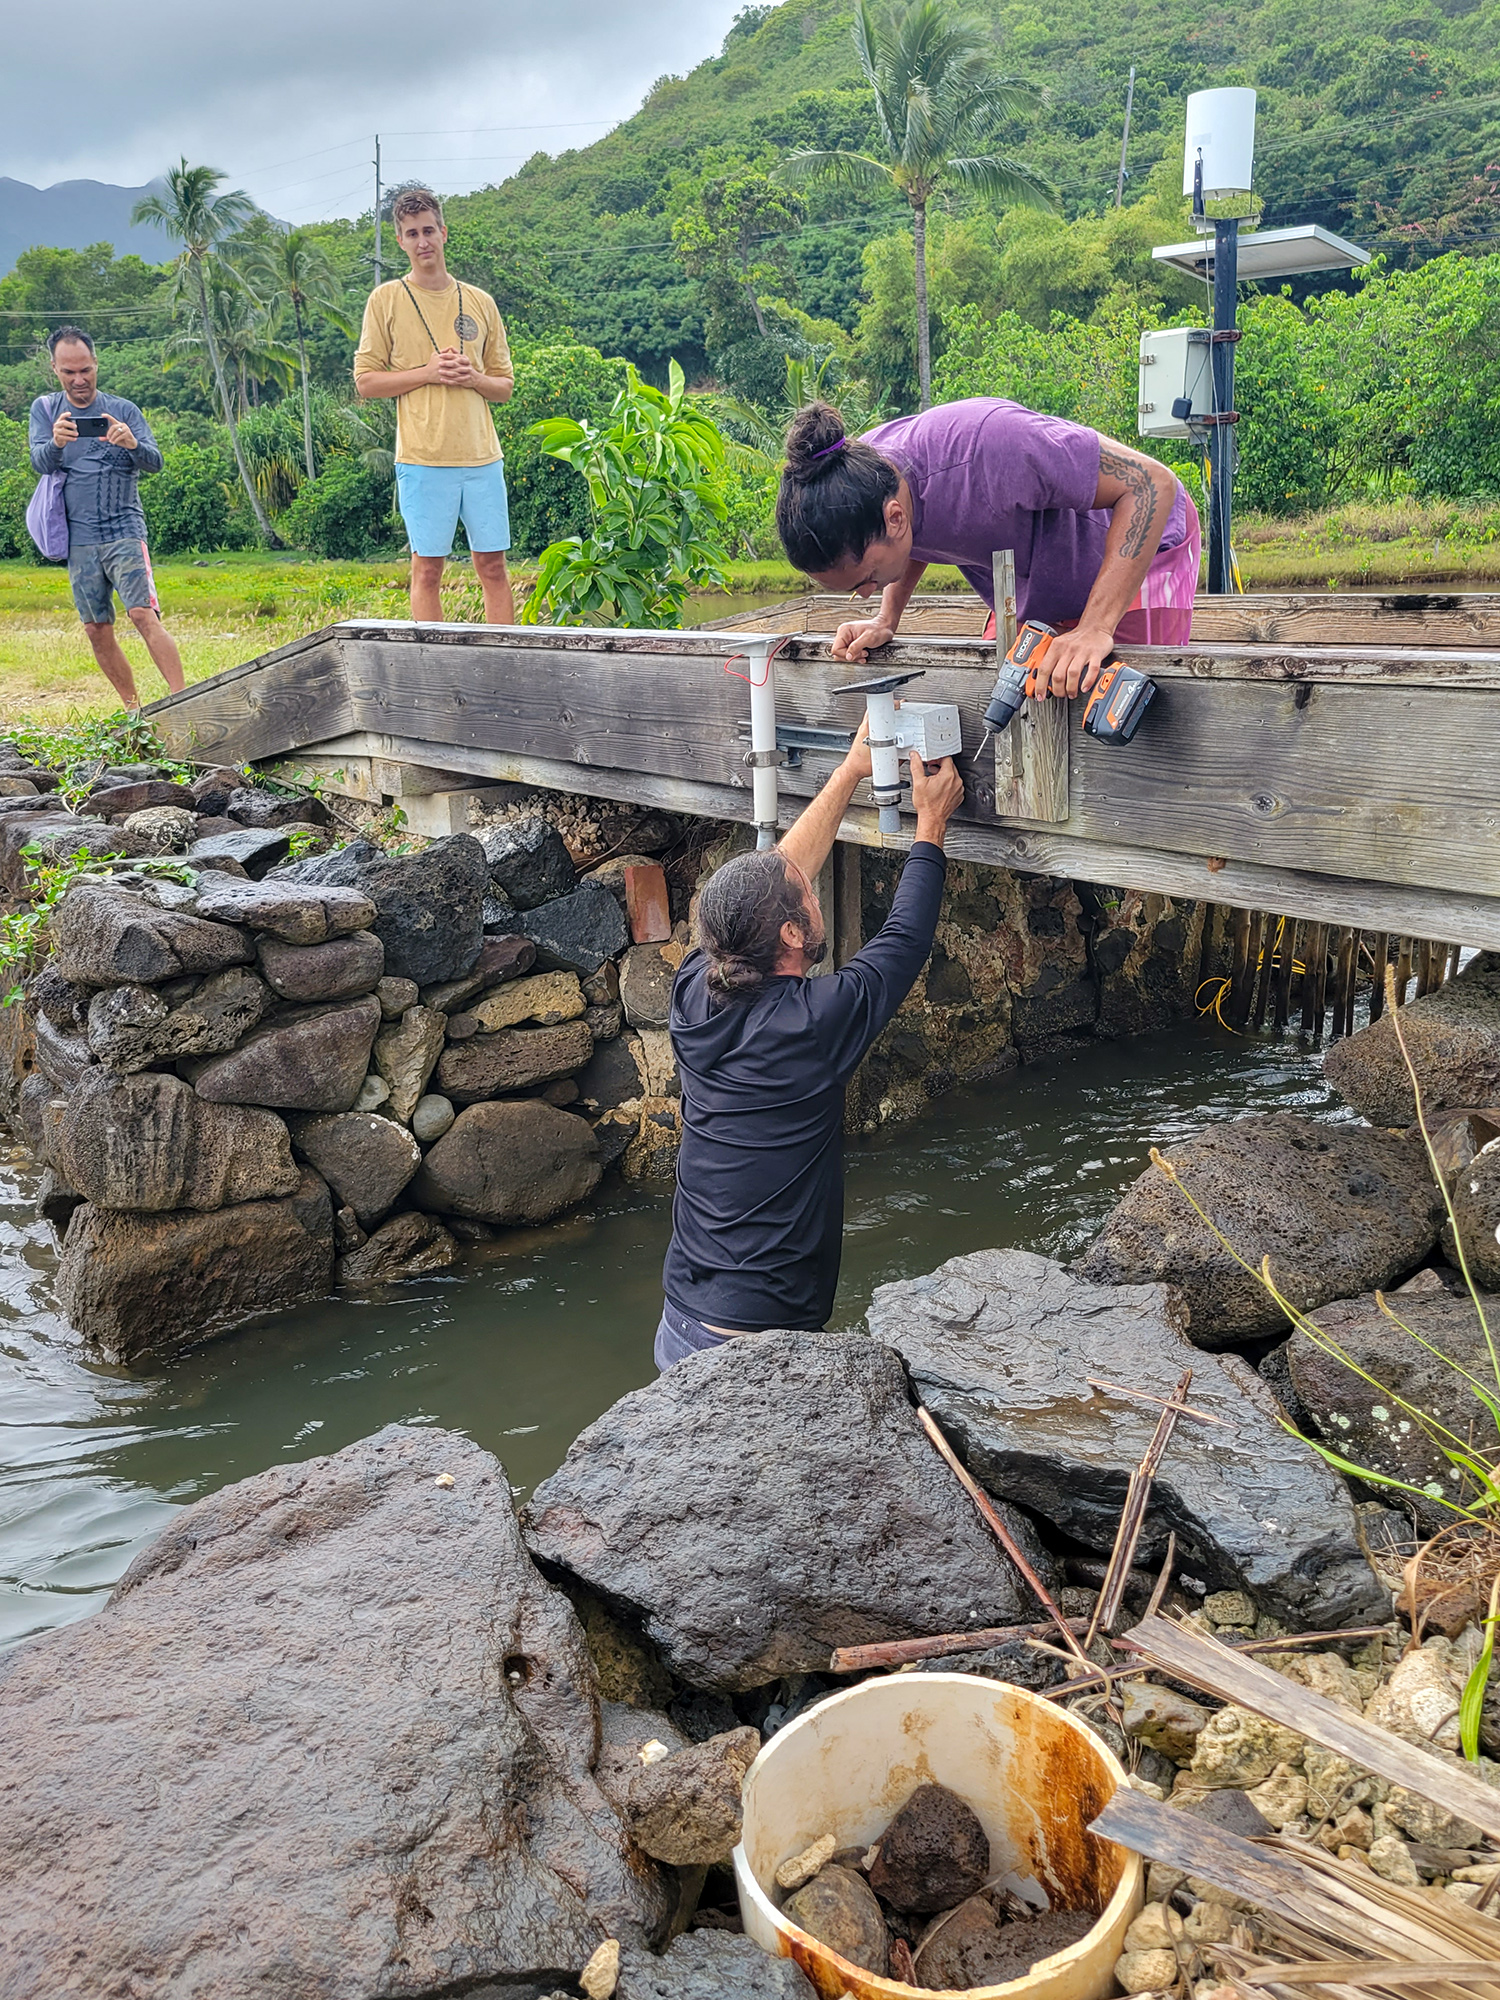 Two men, one hip-deep in water and the other above kneeling on a bridge, work together to install a sensor that will monitor water conditions in an ancient fishpond in Hawaii.